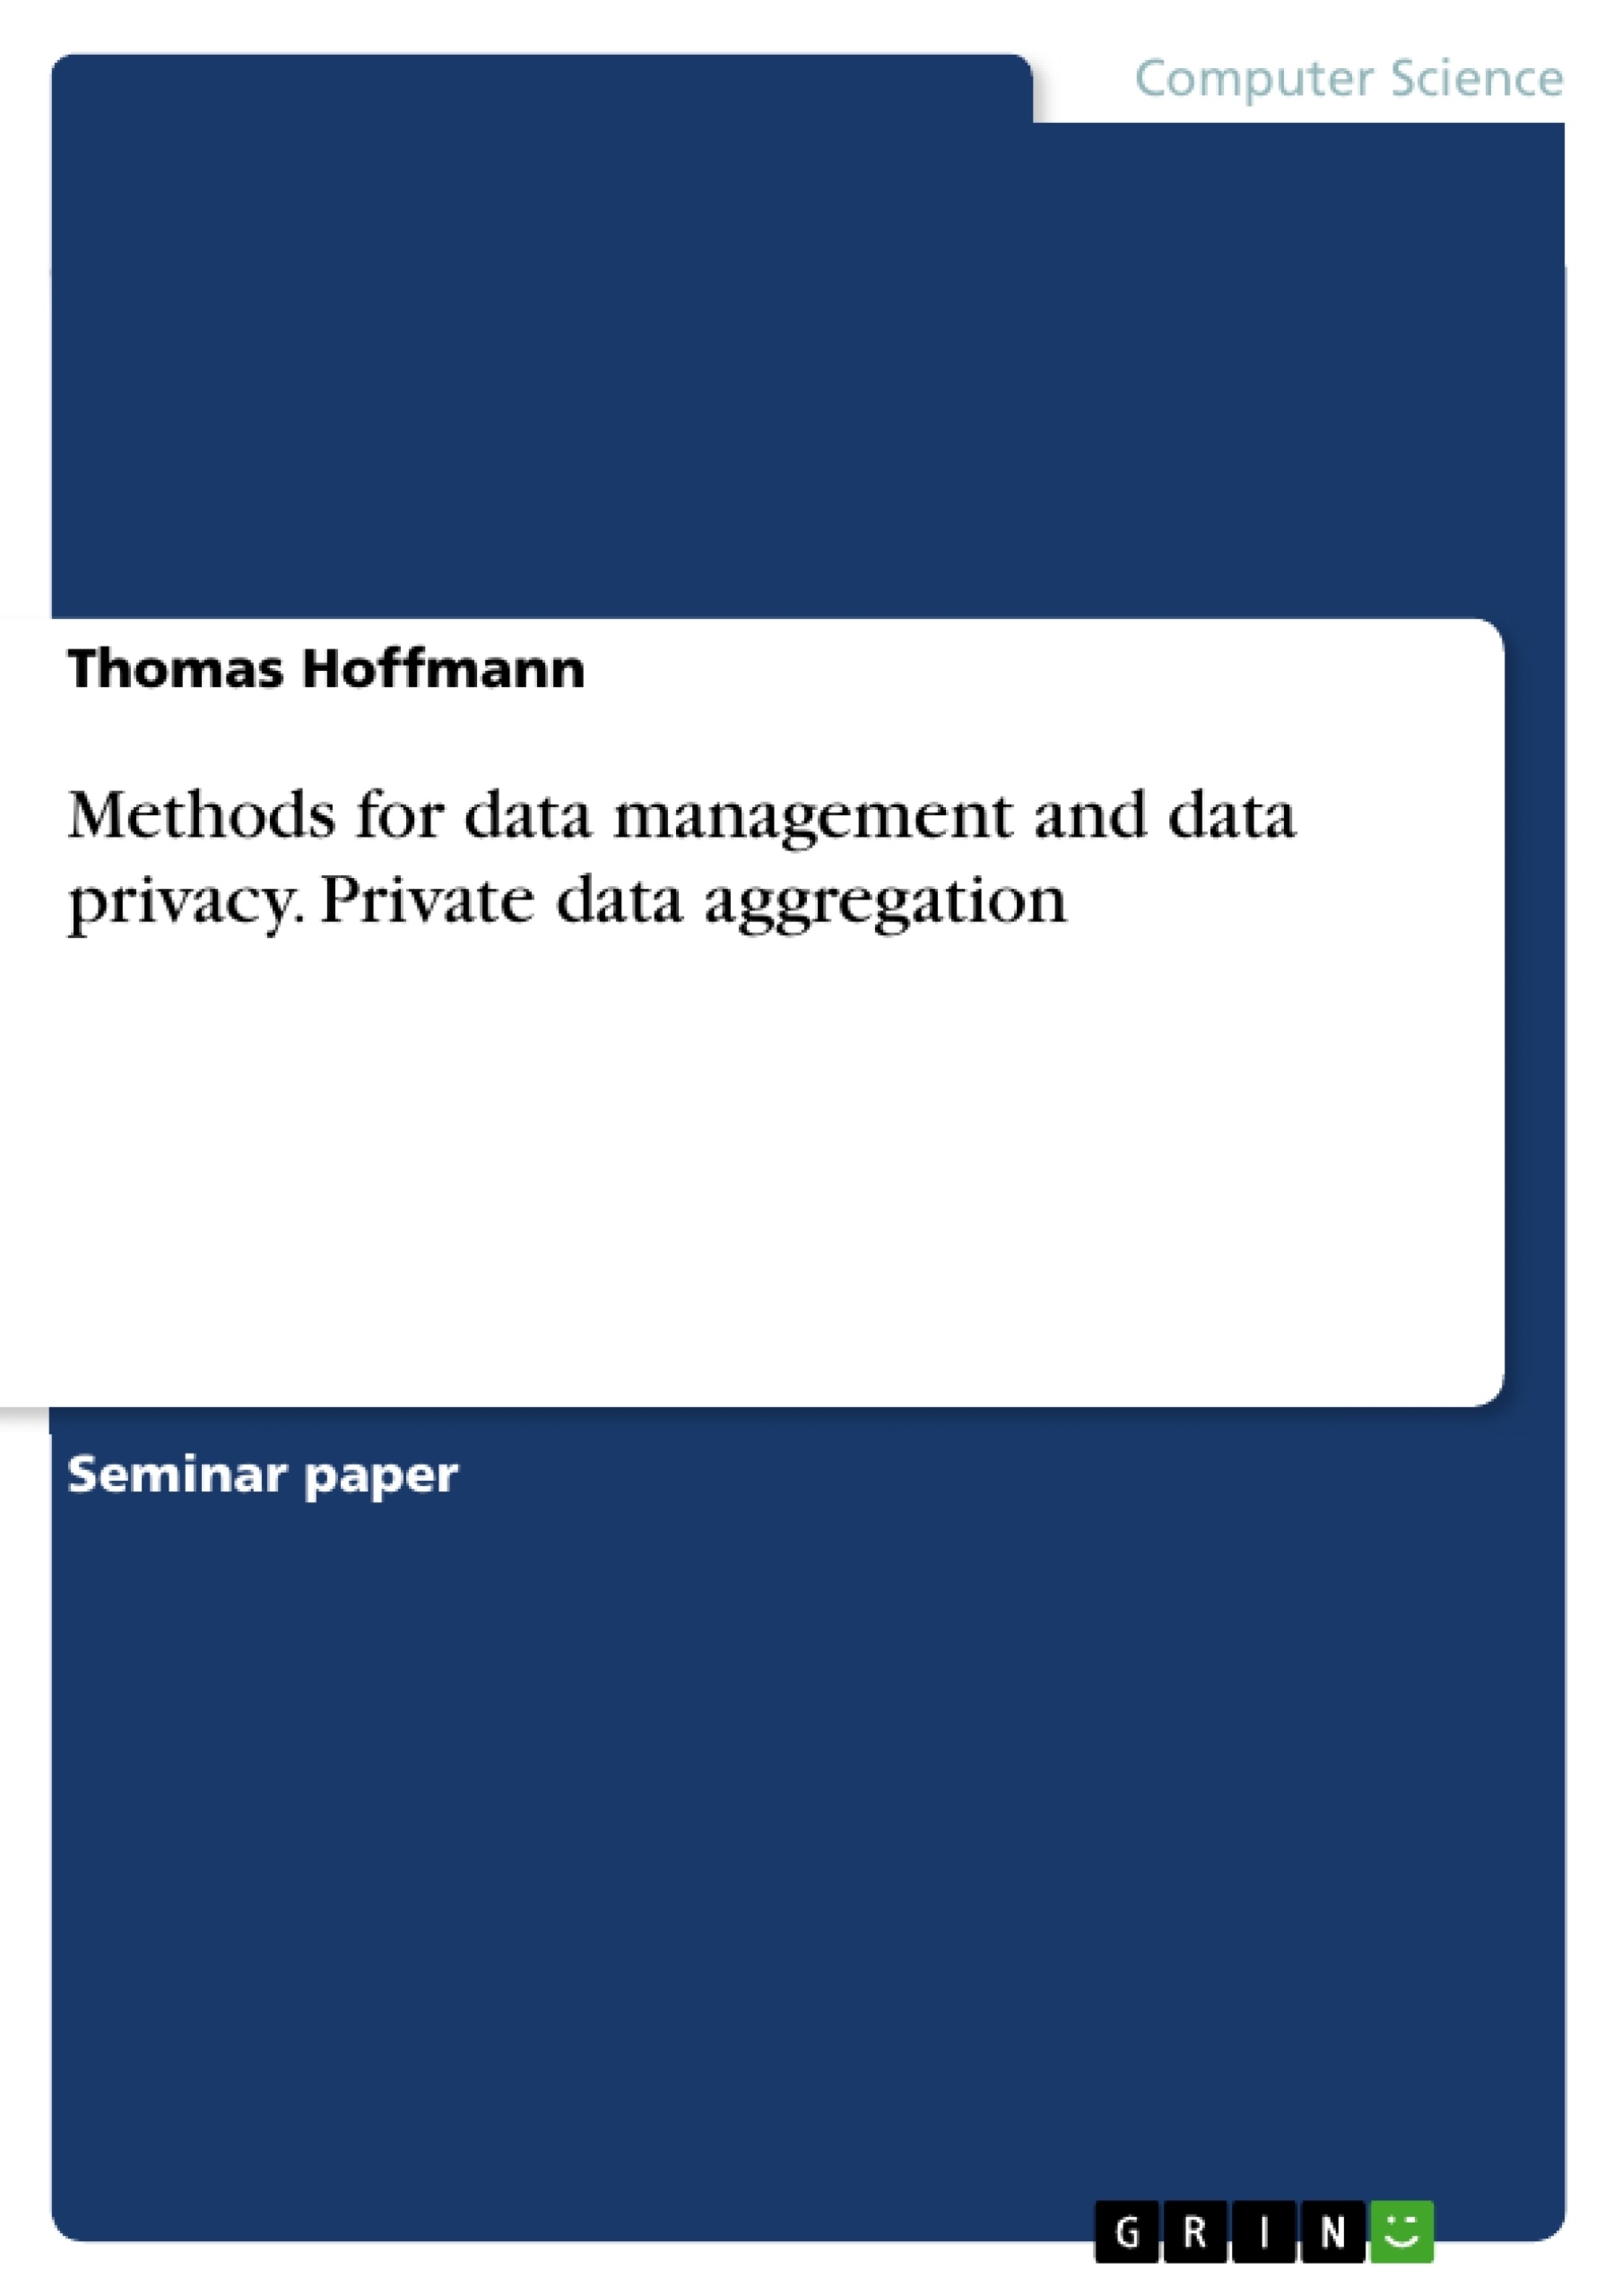 Title: Methods for data management and data privacy. Private data aggregation